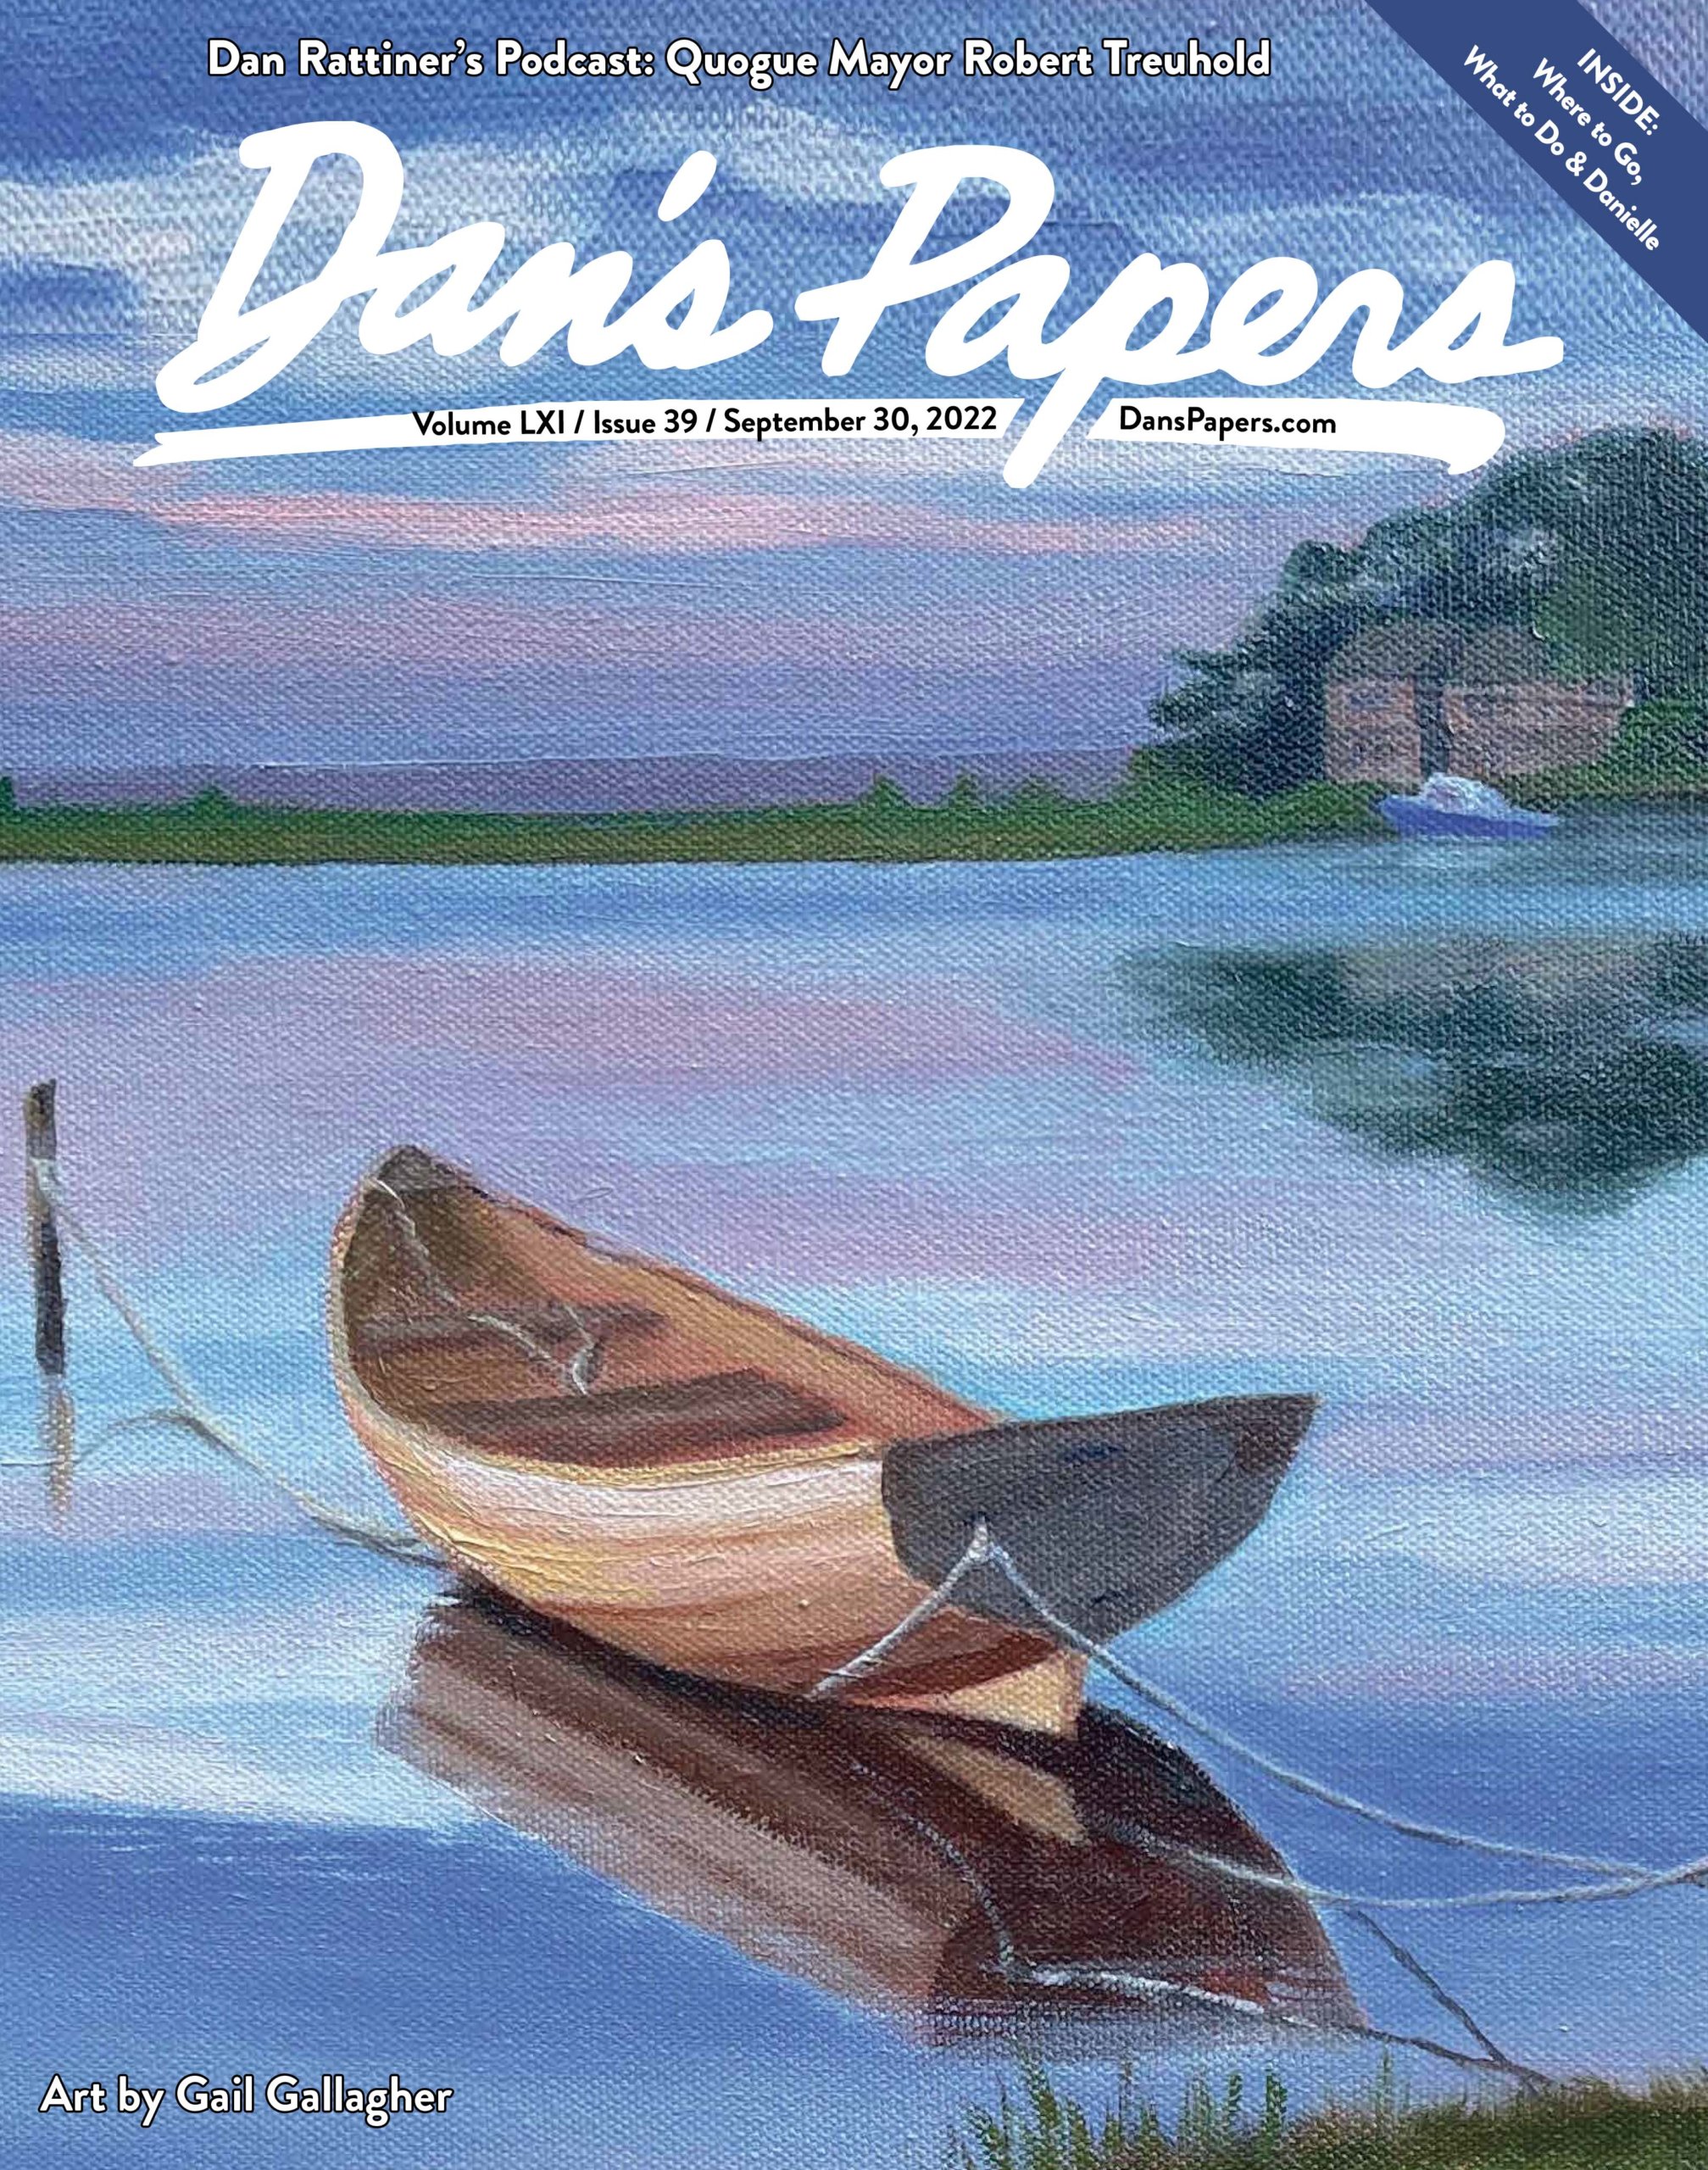 September 30, 2022 Dan's Papers cover art by Gail Gallagher